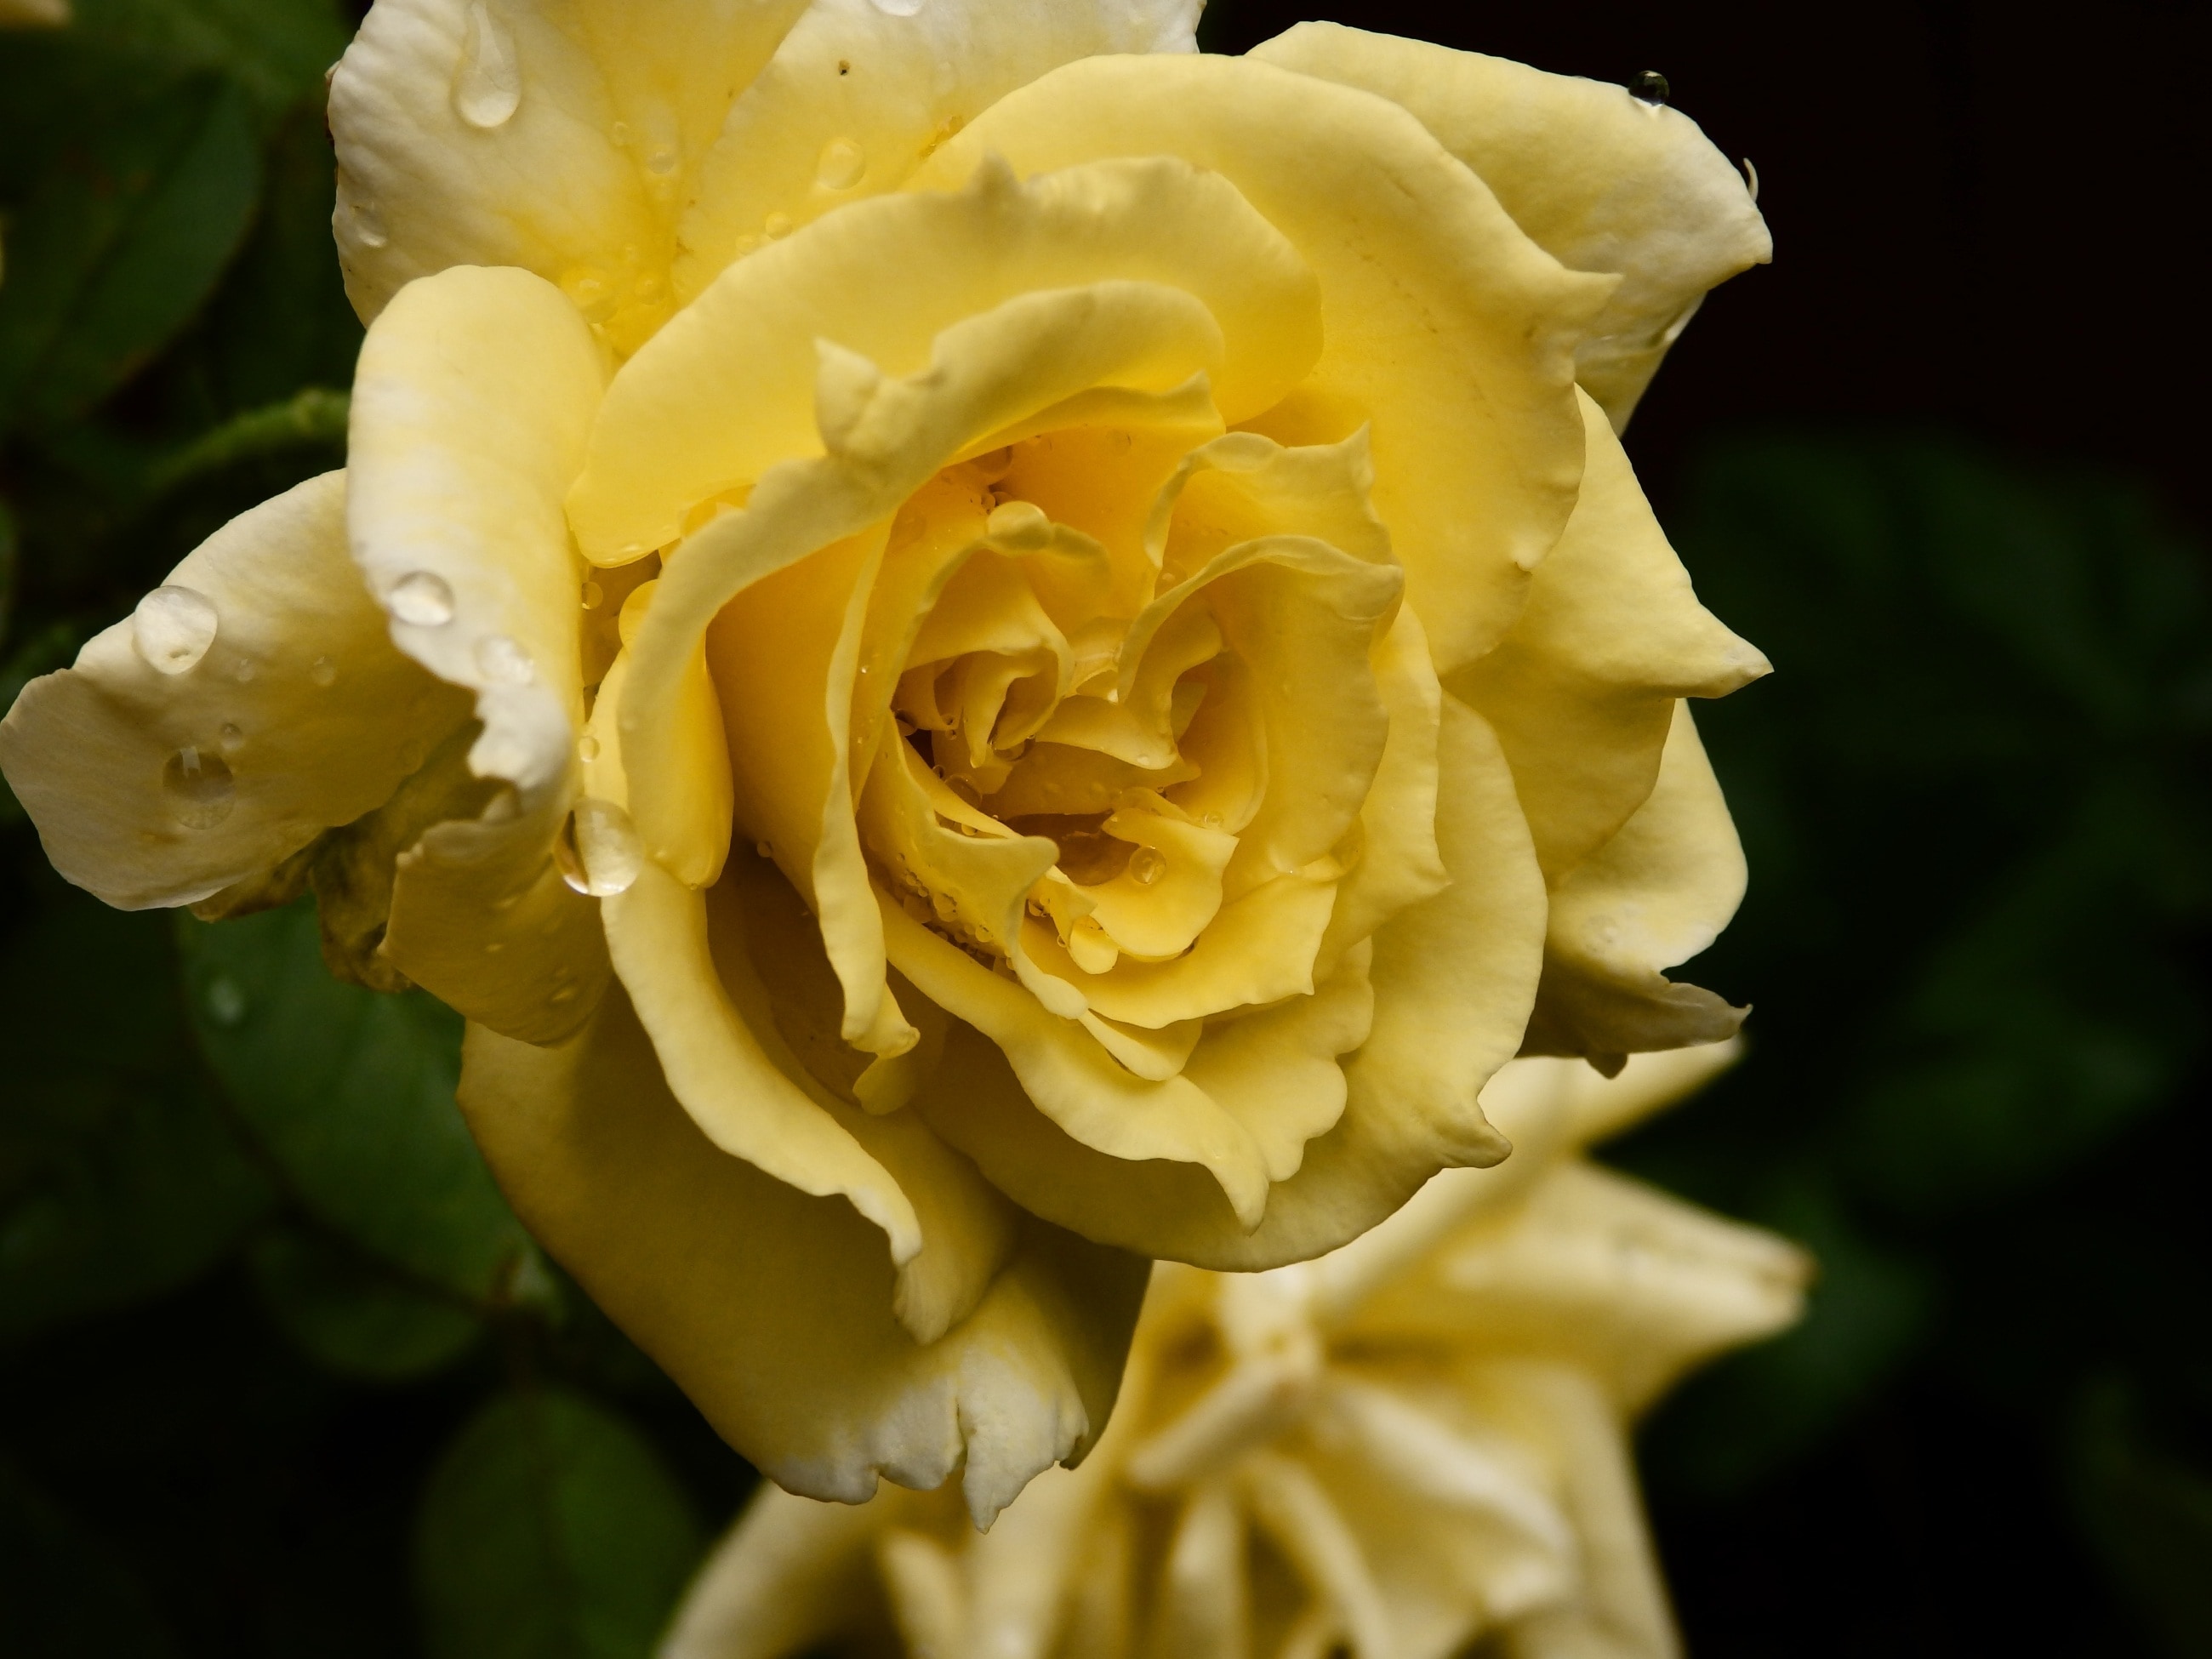 close-up photography of yellow rose with water droplets